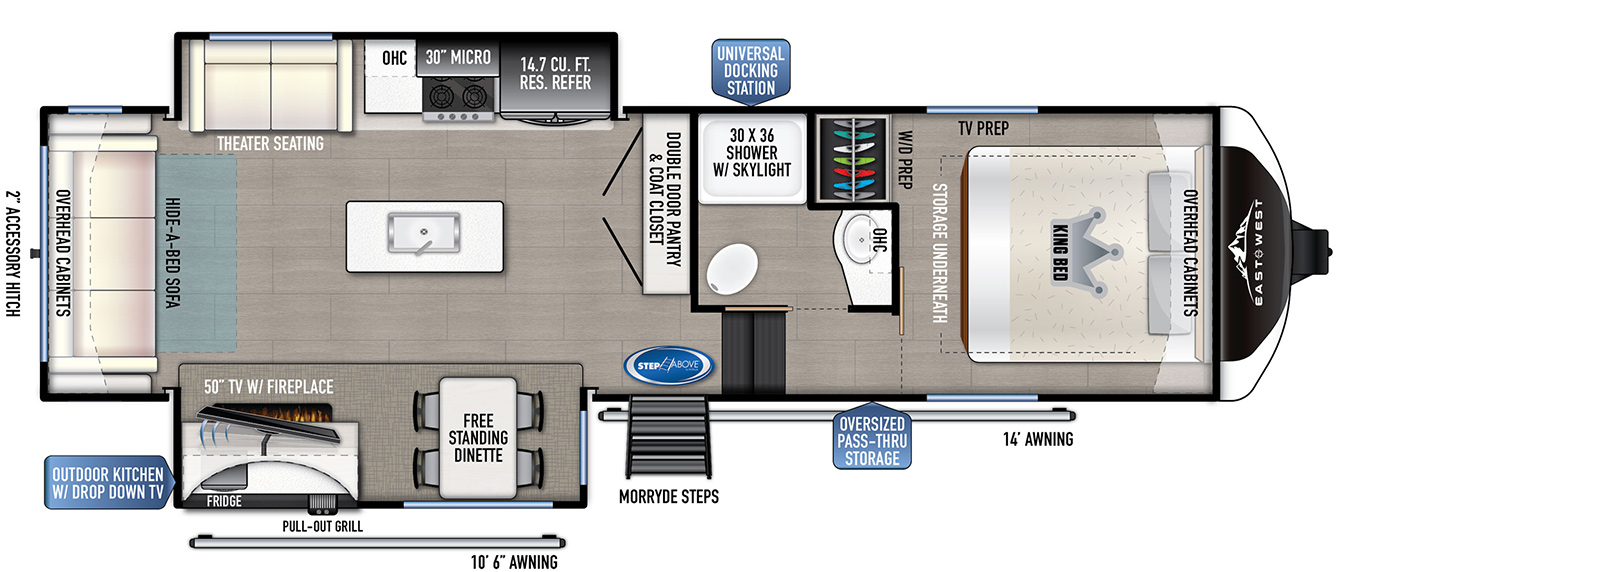 The 286 RL-OK has 2 slide outs, one on the off door side and one on the door side along with one entry door. Interior layout from front to back: front bedroom with king bed featuring overhead cabinets, bedside nightstands, TV hookup and underbed storage; side aisle bathroom with solid pocket door, shower, medicine cabinet above the sink and a porcelain toilet; kitchen living dining area features a double door pantry and coat closet; kitchen island with deep seated sink; off door side slide-out containing refrigerator, oven, microwave and theater seating; door side slide-out containing dinette and entertainment center with outdoor kitchen behind; and a 78" wide rear sofa with 72" wide rear window and overhead cabinets above.